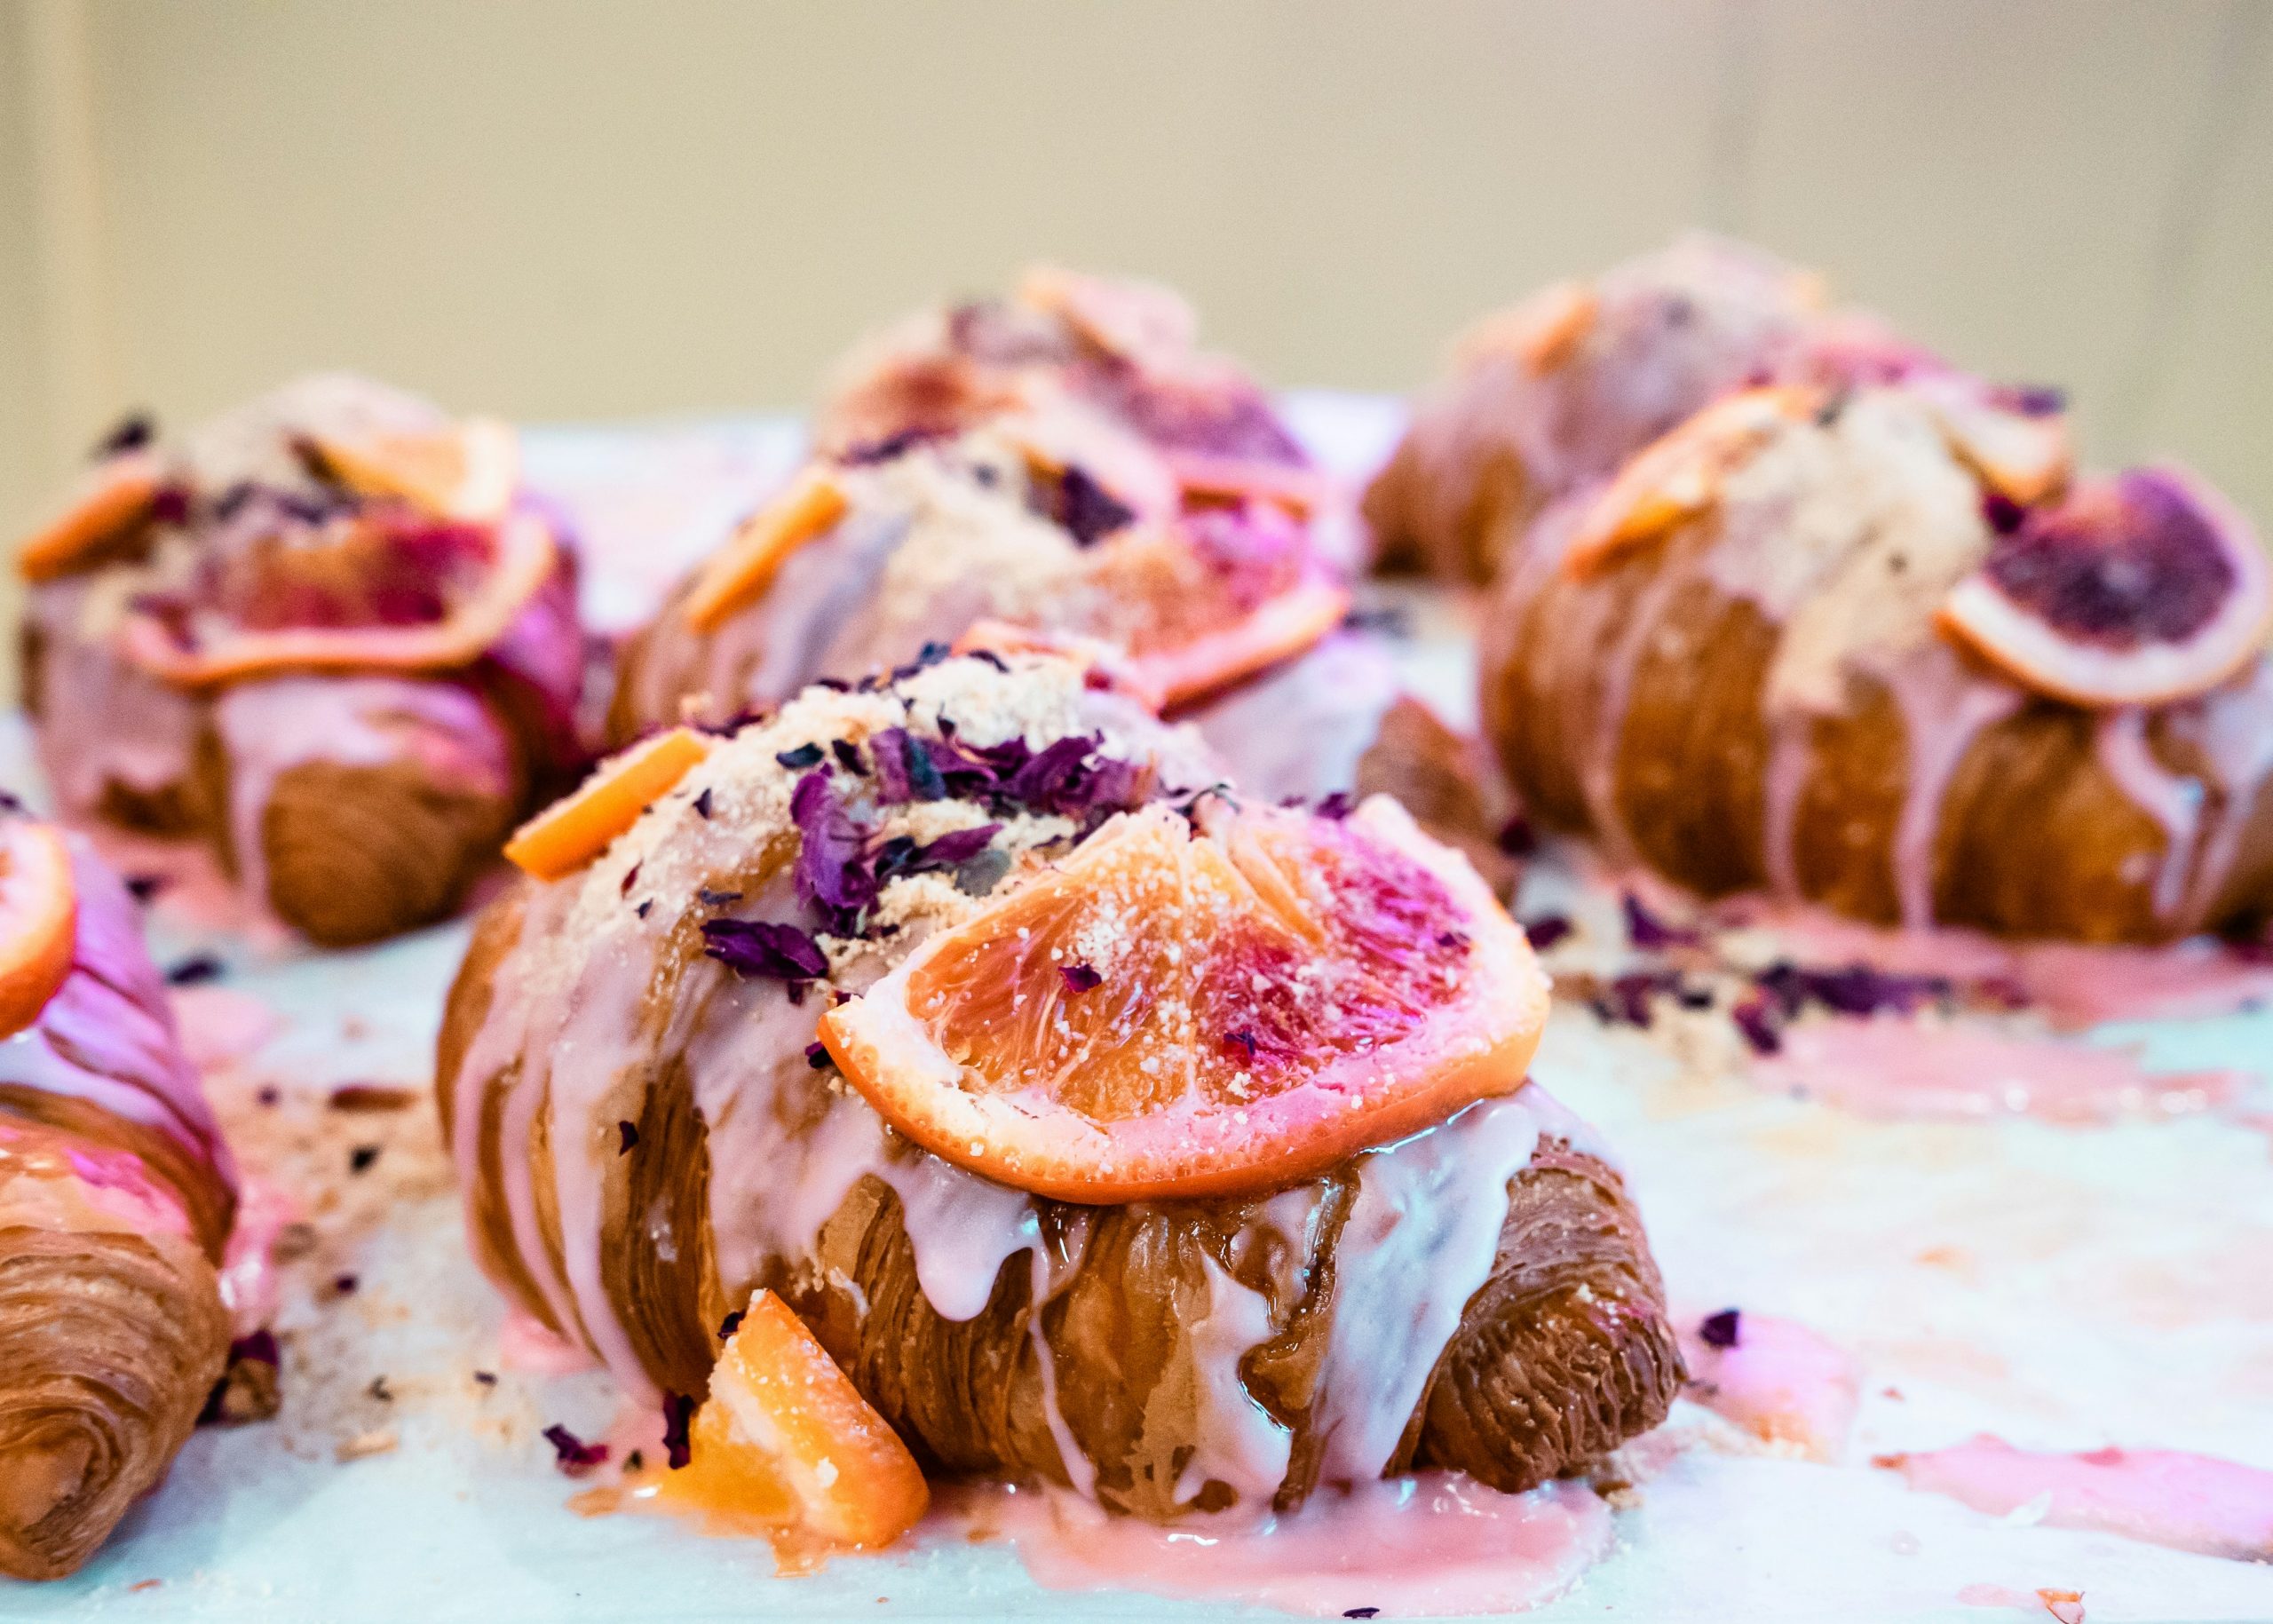 Croissants with pink garnish and fruit on top